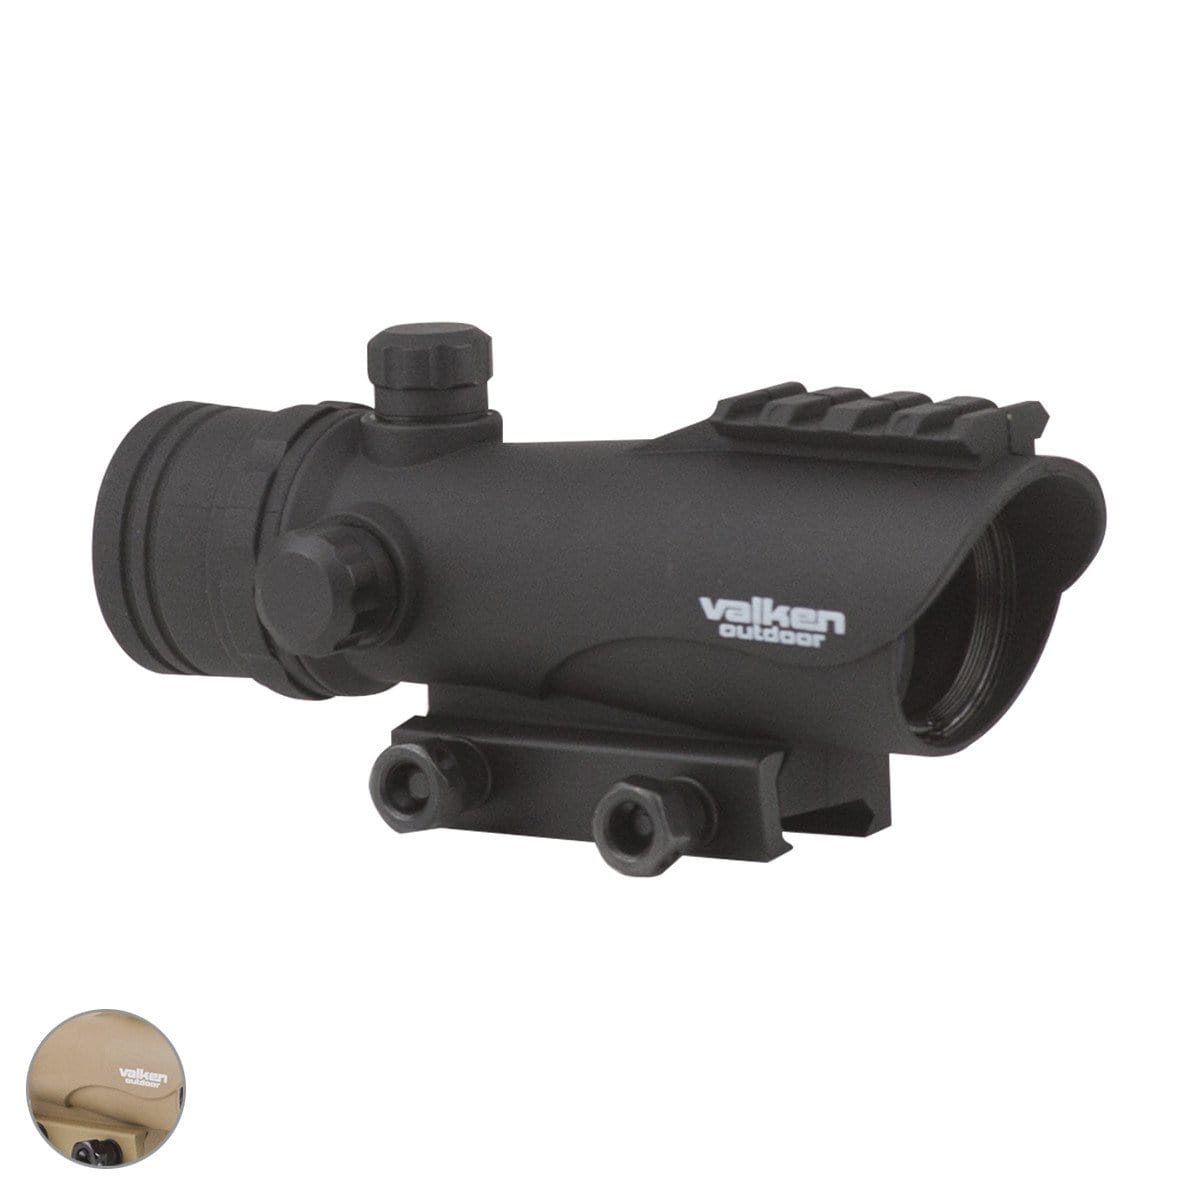 Valken Red Dot Sight RDA30 - Black - Eminent Paintball And Airsoft